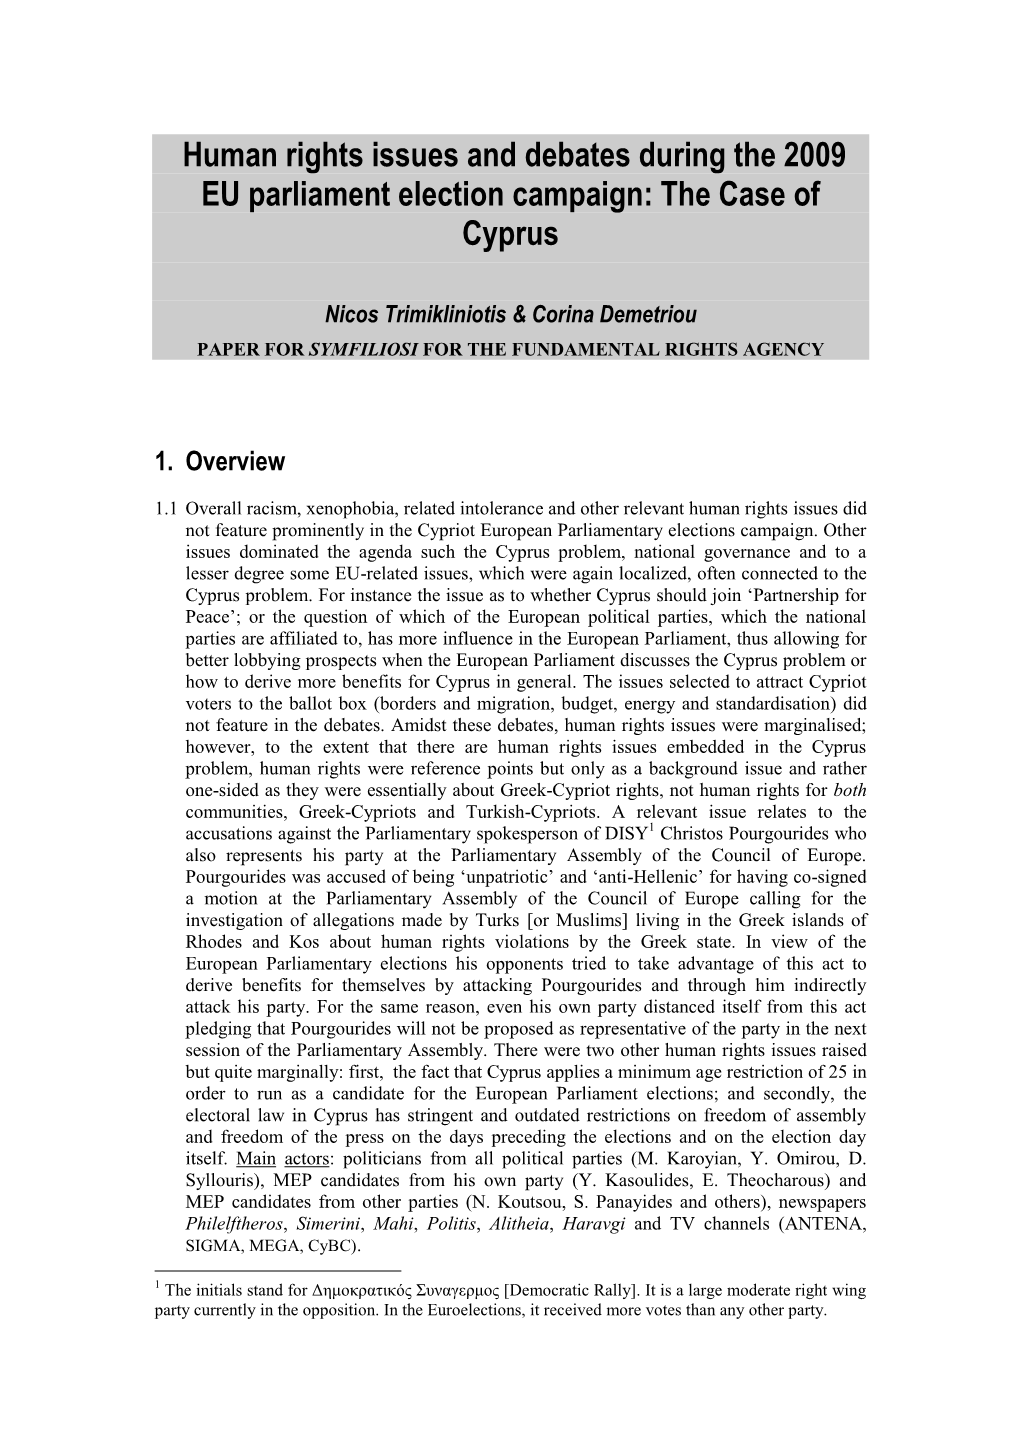 Human Rights Issues and Debates During the 2009 EU Parliament Election Campaign: the Case of Cyprus